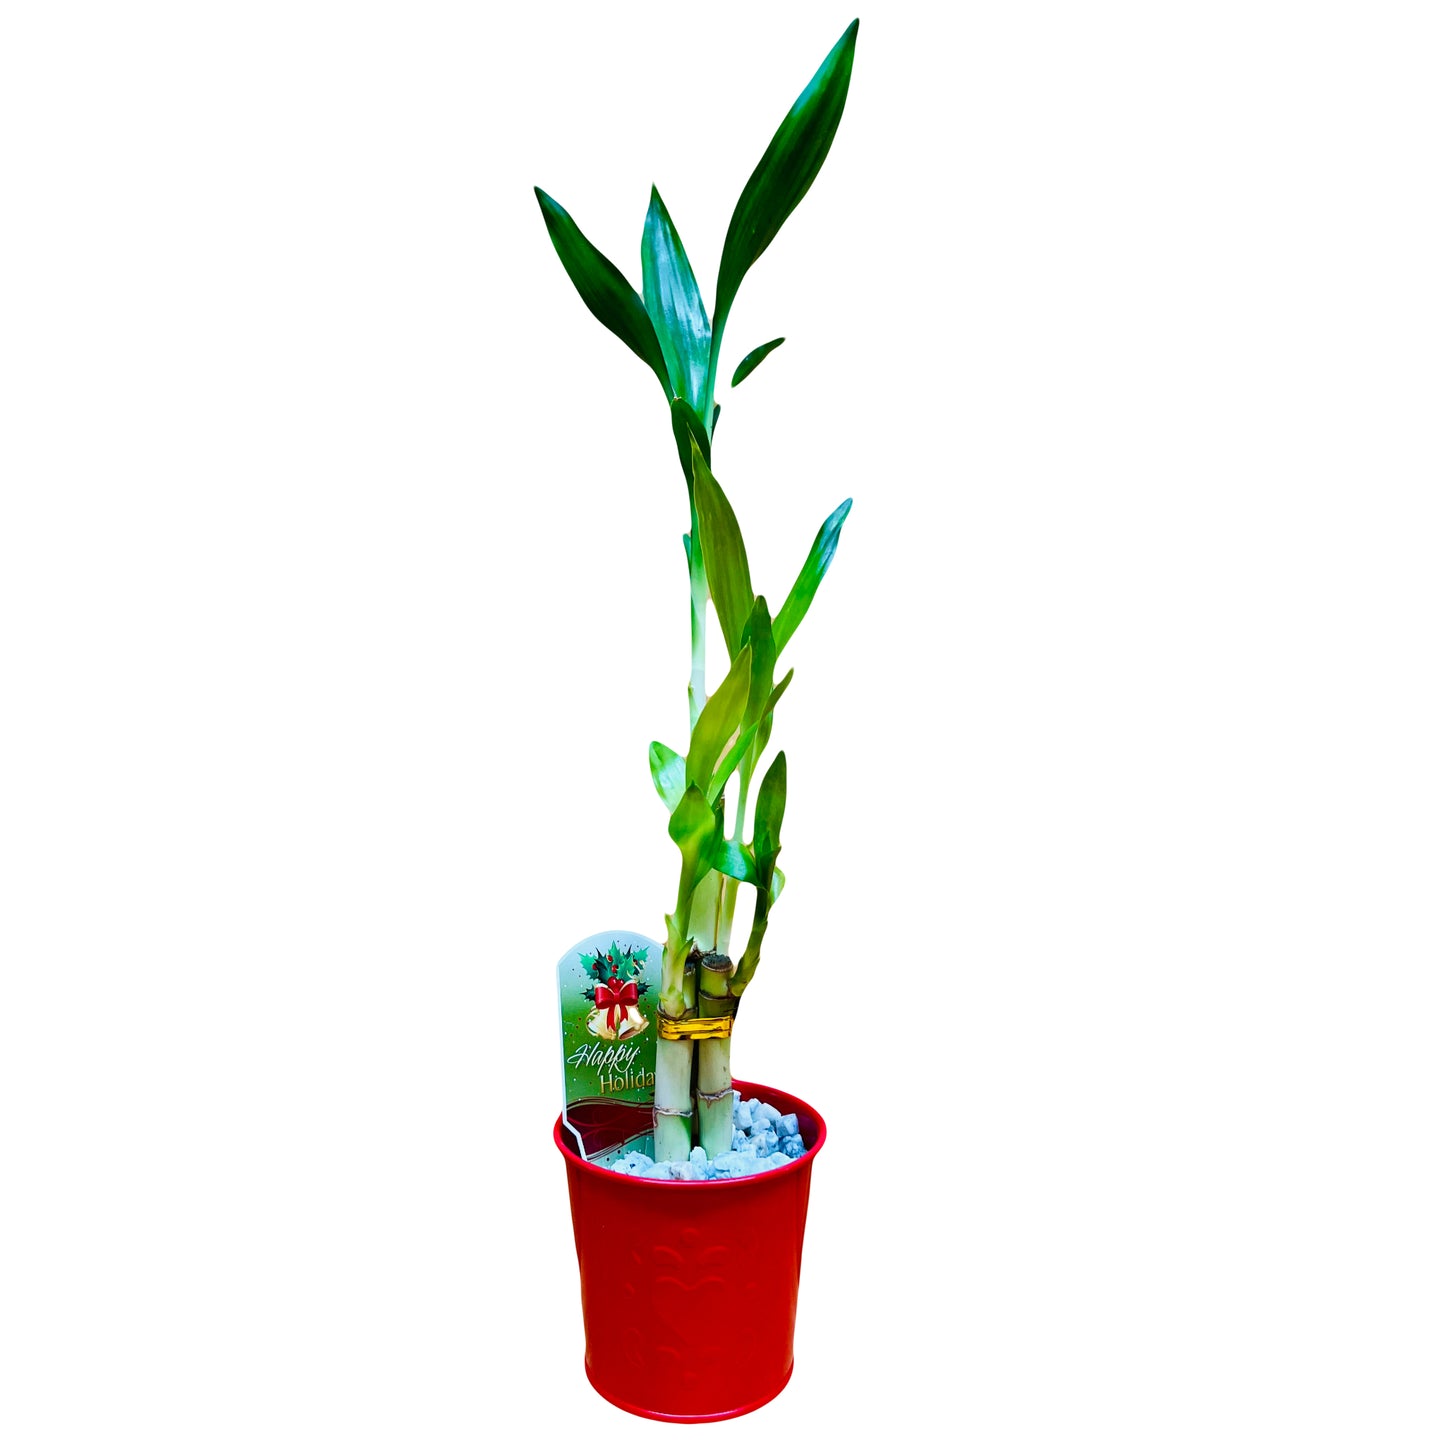 Lucky Bamboo 6”6”8” Red Metal Holiday Pot with Heart Design includes Marble Rock Chips